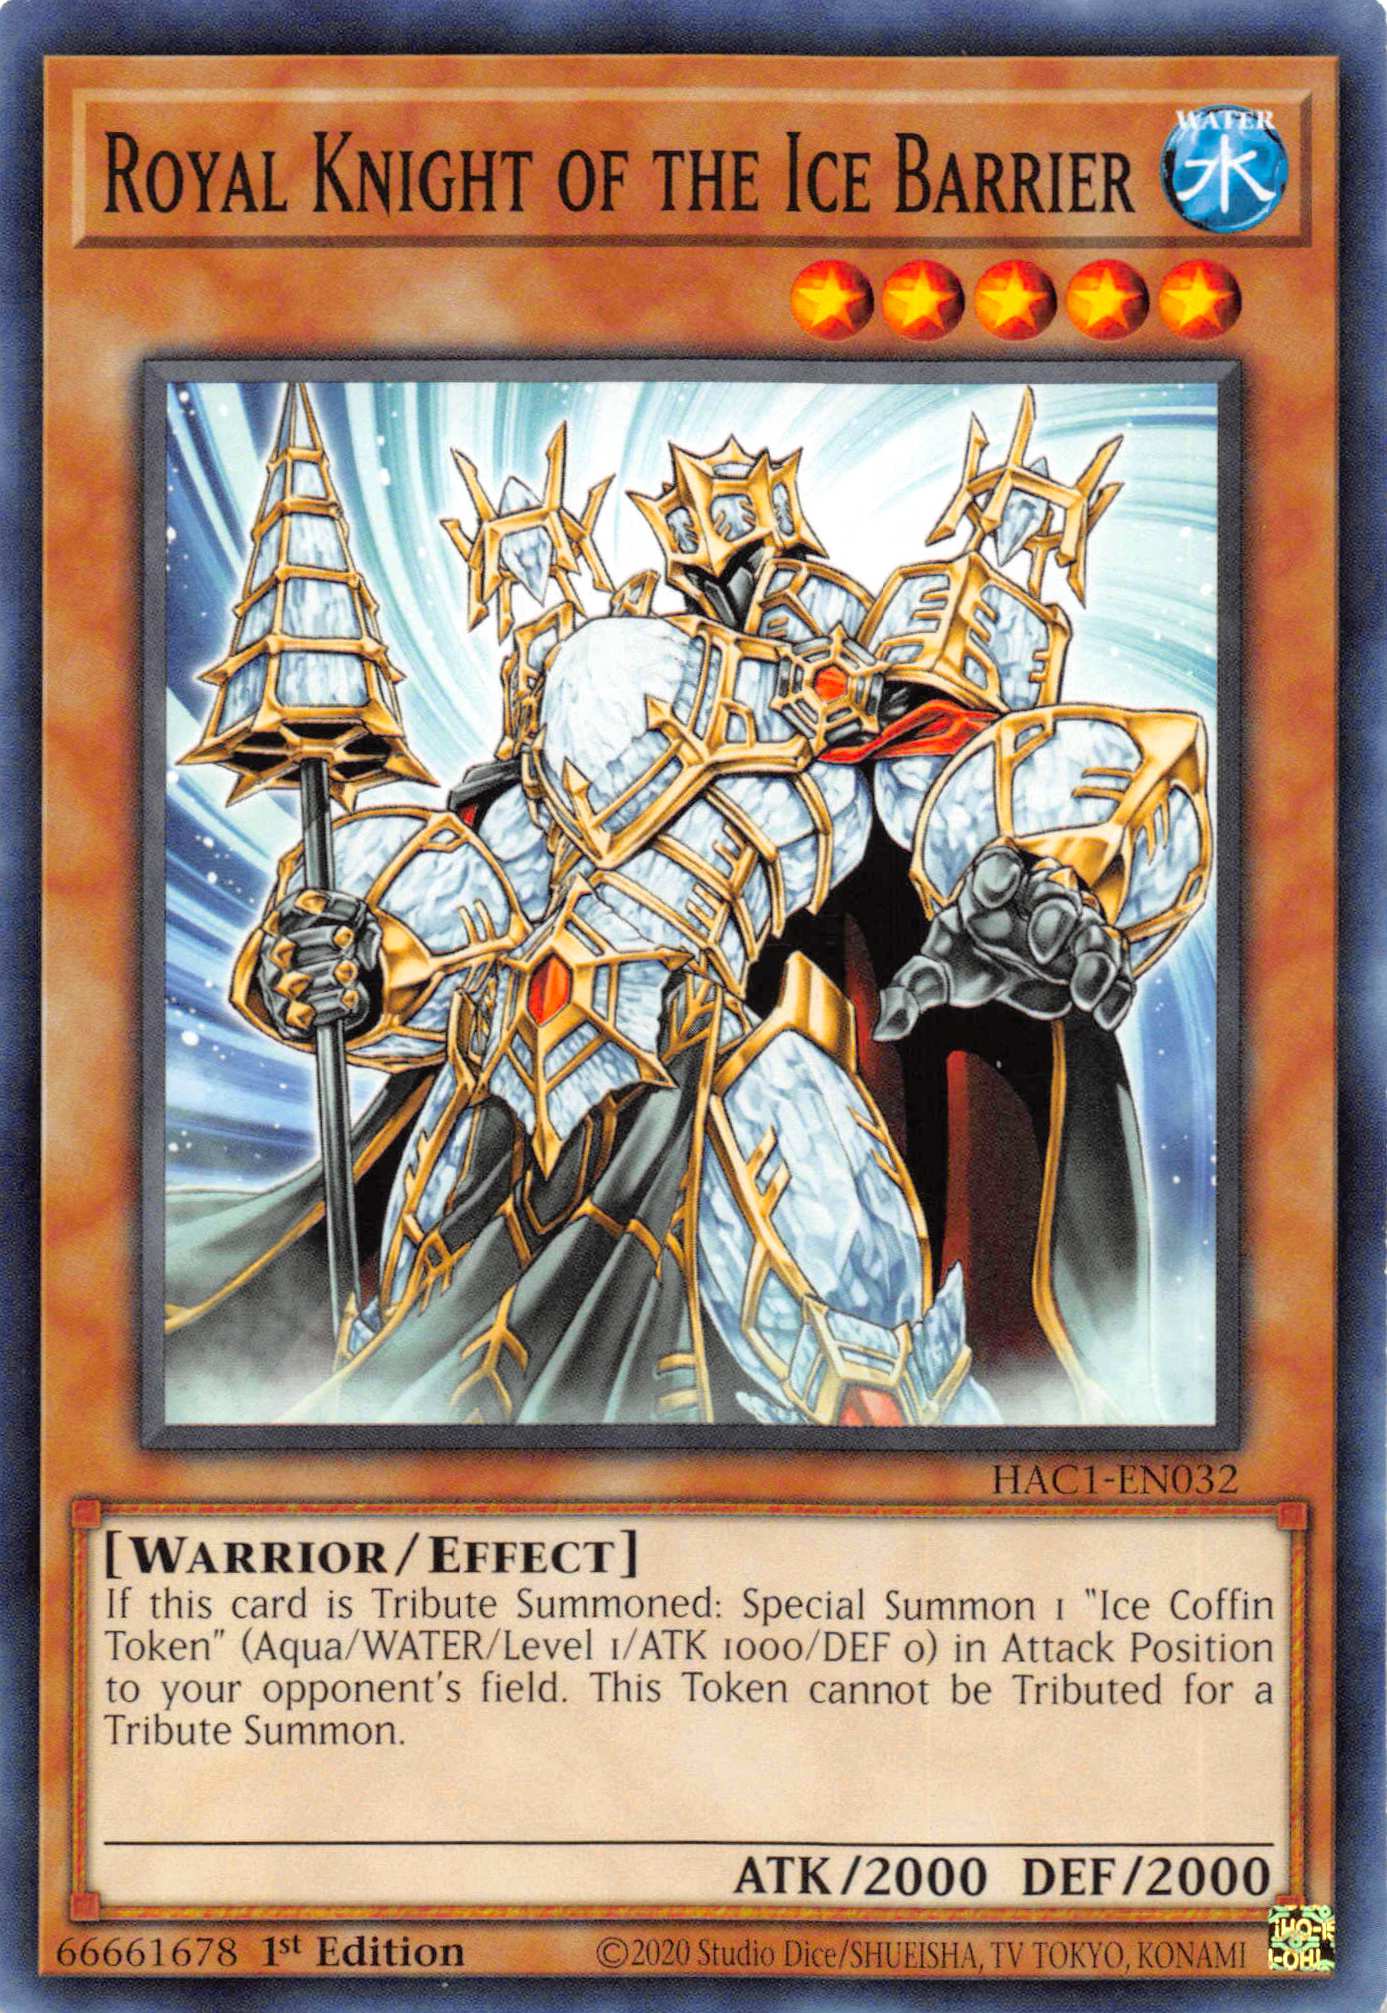 Royal Knight of the Ice Barrier (Duel Terminal) [HAC1-EN032] Parallel Rare - Duel Kingdom